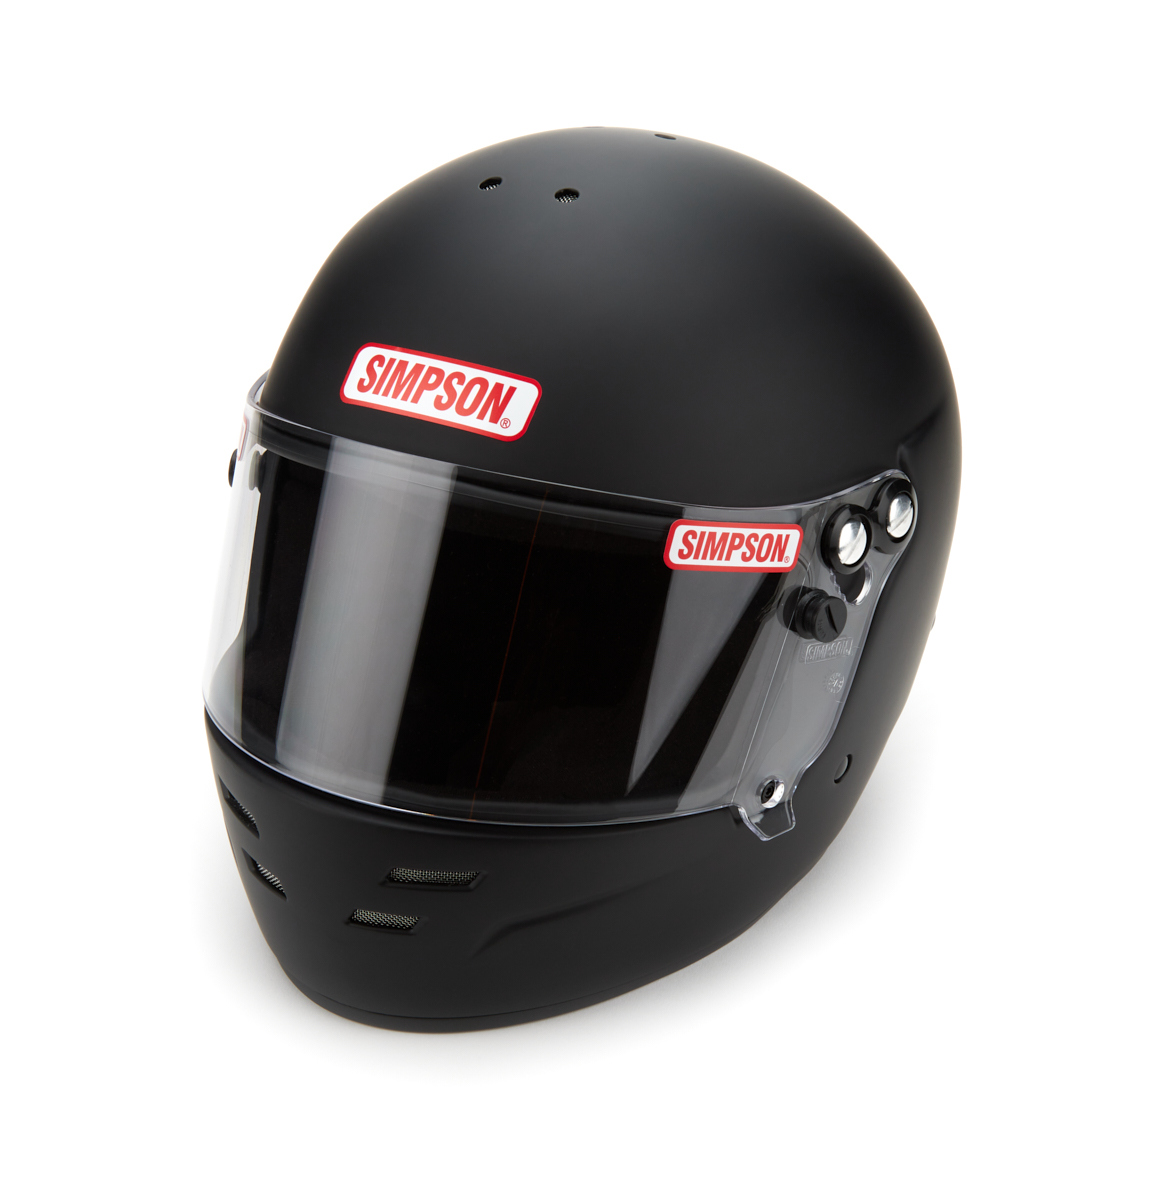 Helmet - Viper - Full Face - Snell SA2020 - Head and Neck Support Ready - Flat Black - 2X-Large - Each